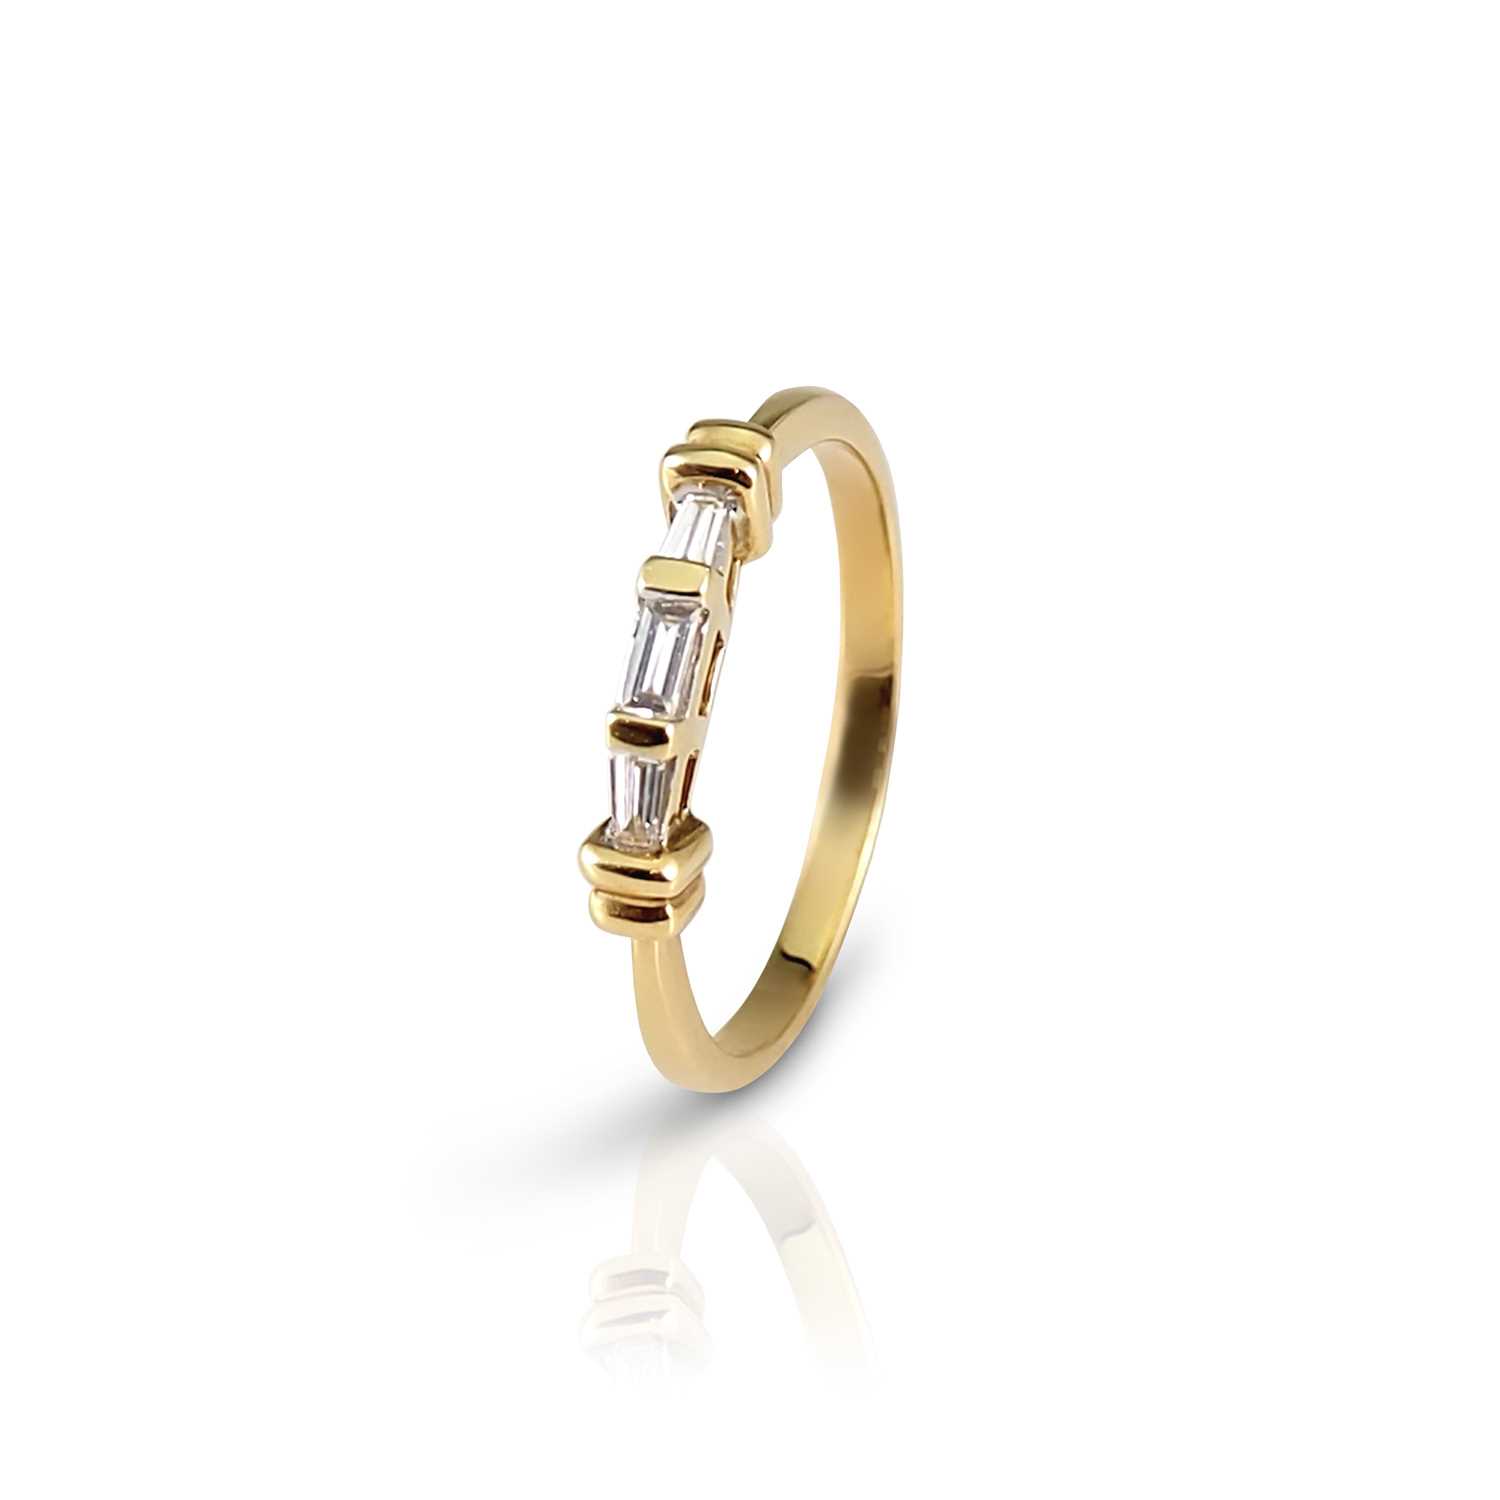 Lot 53 - 18K Gold Ring set with Diamonds